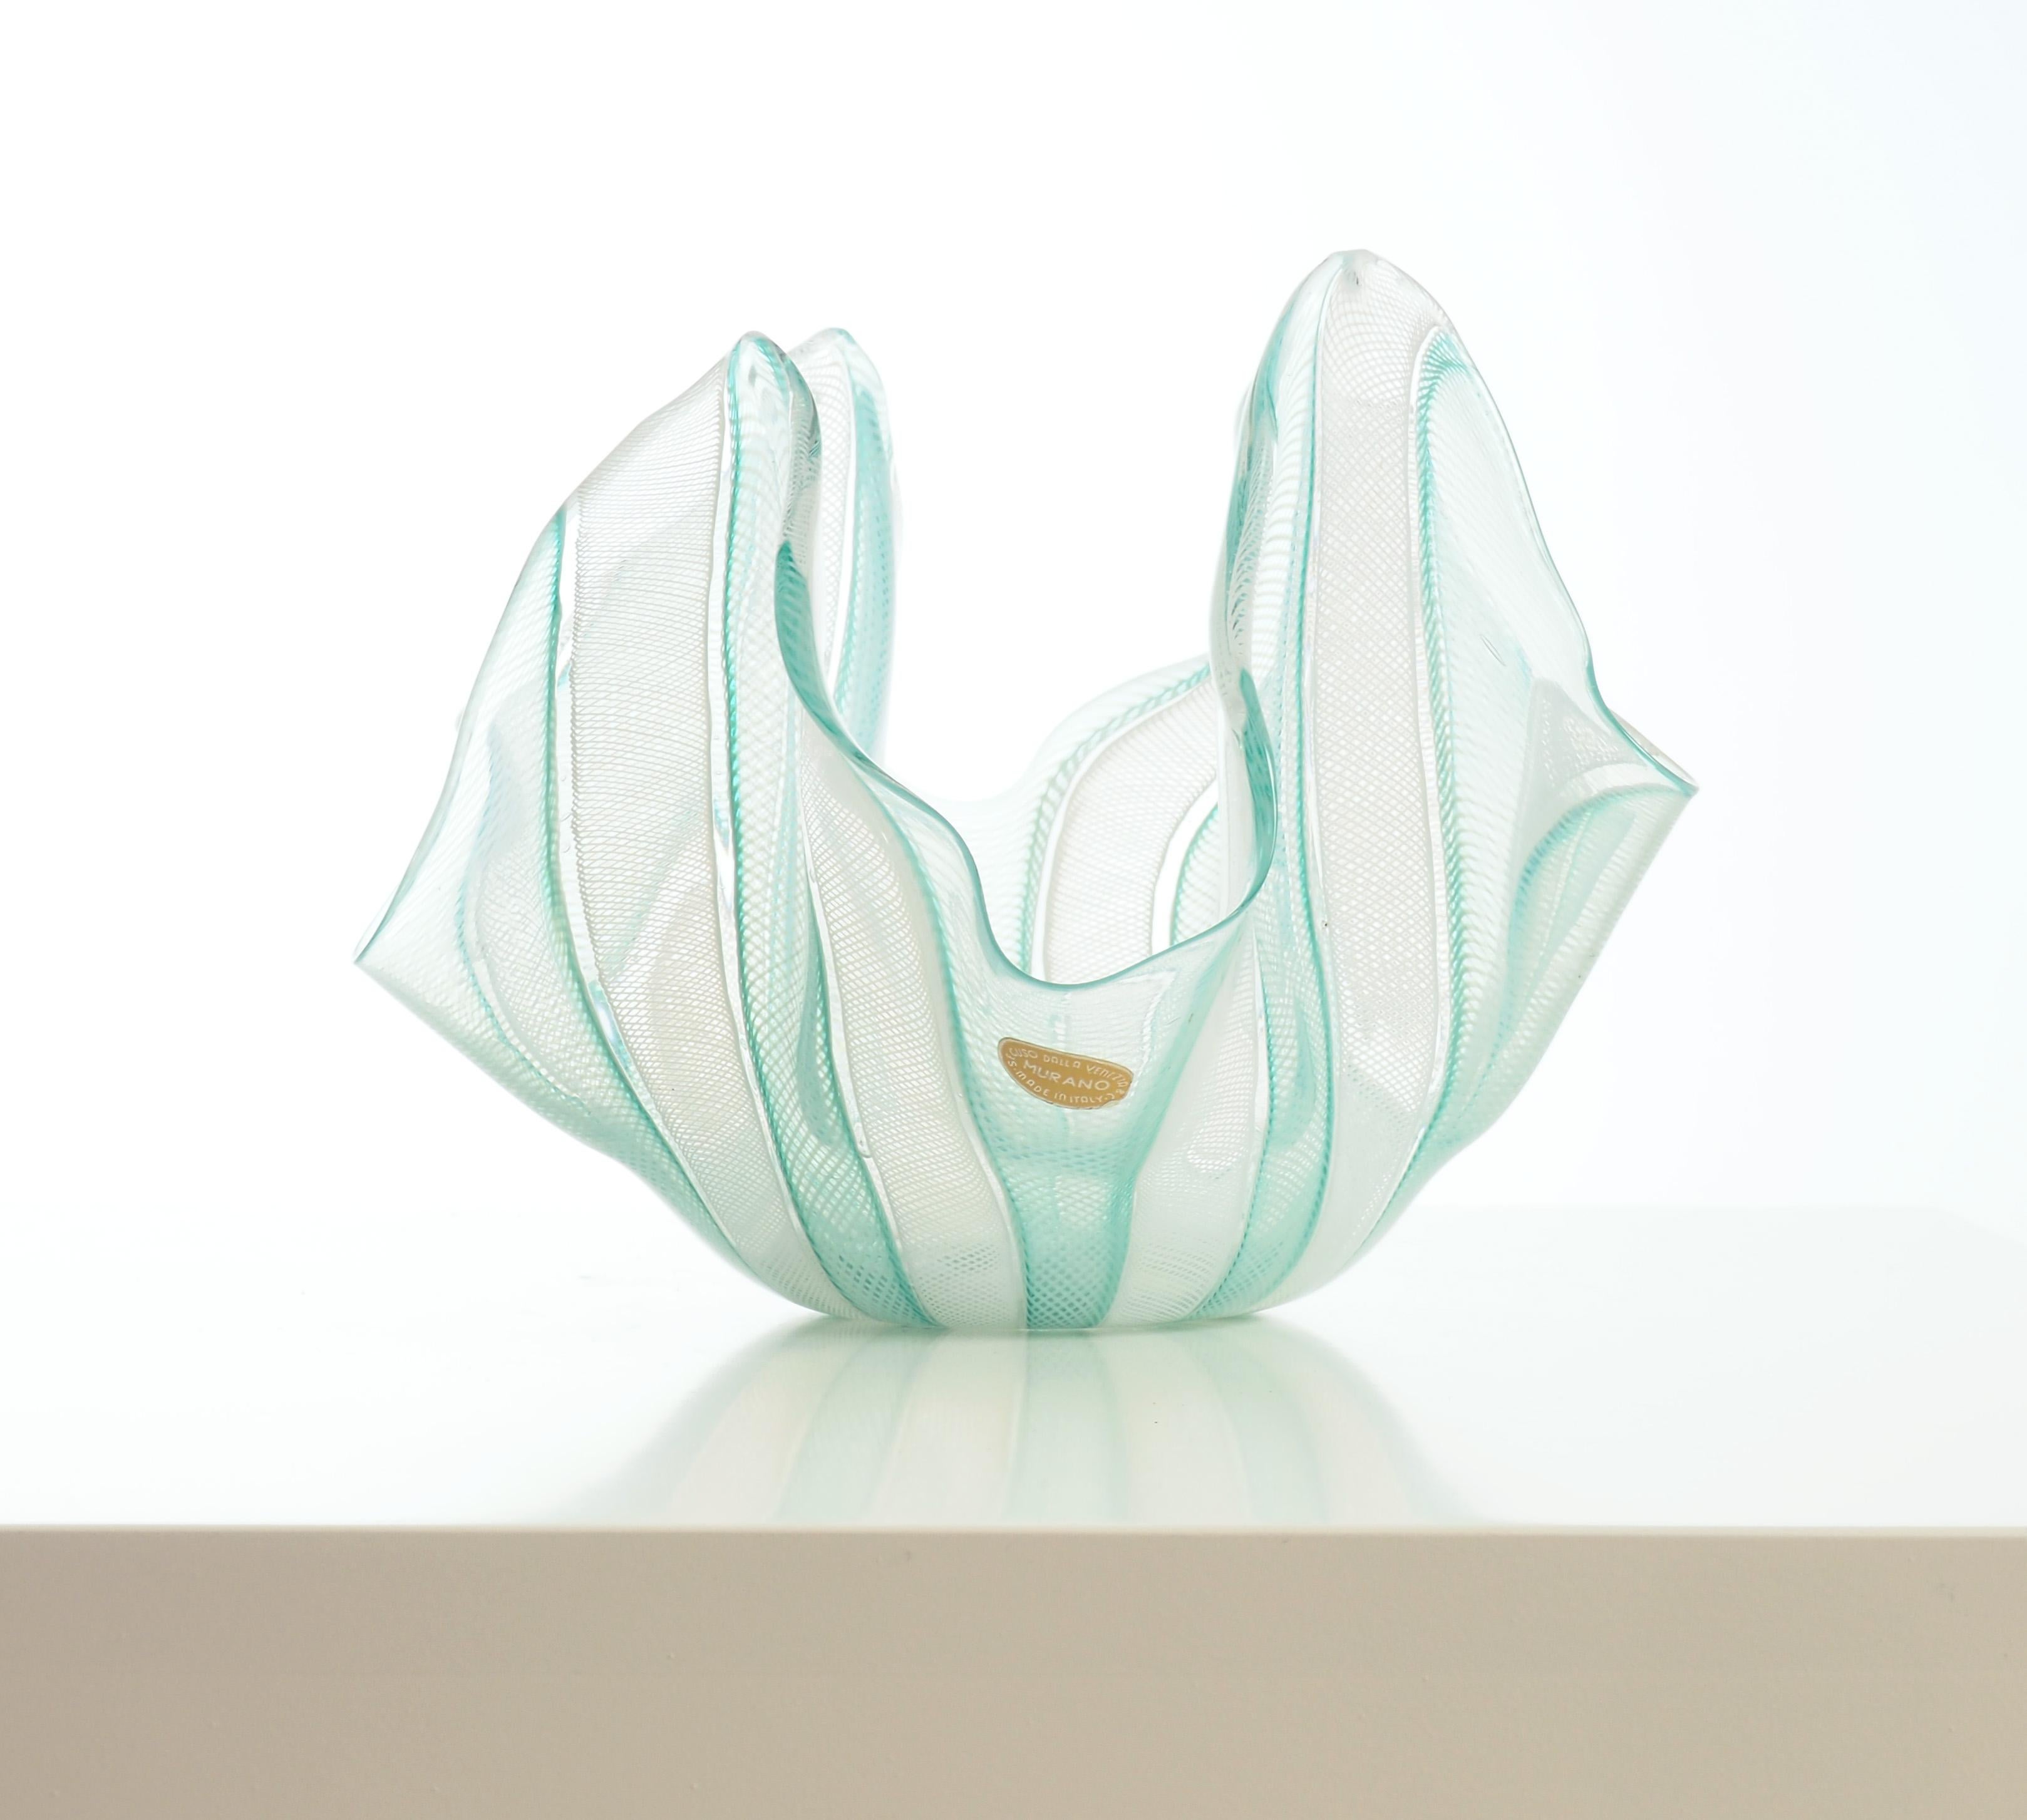 Handkerchief bowl, made at Seguso glassworks, Murano, Venice, Italy during the 1950's. 

The decoration was made in the advanced filigrana technique, this one in white and green. 